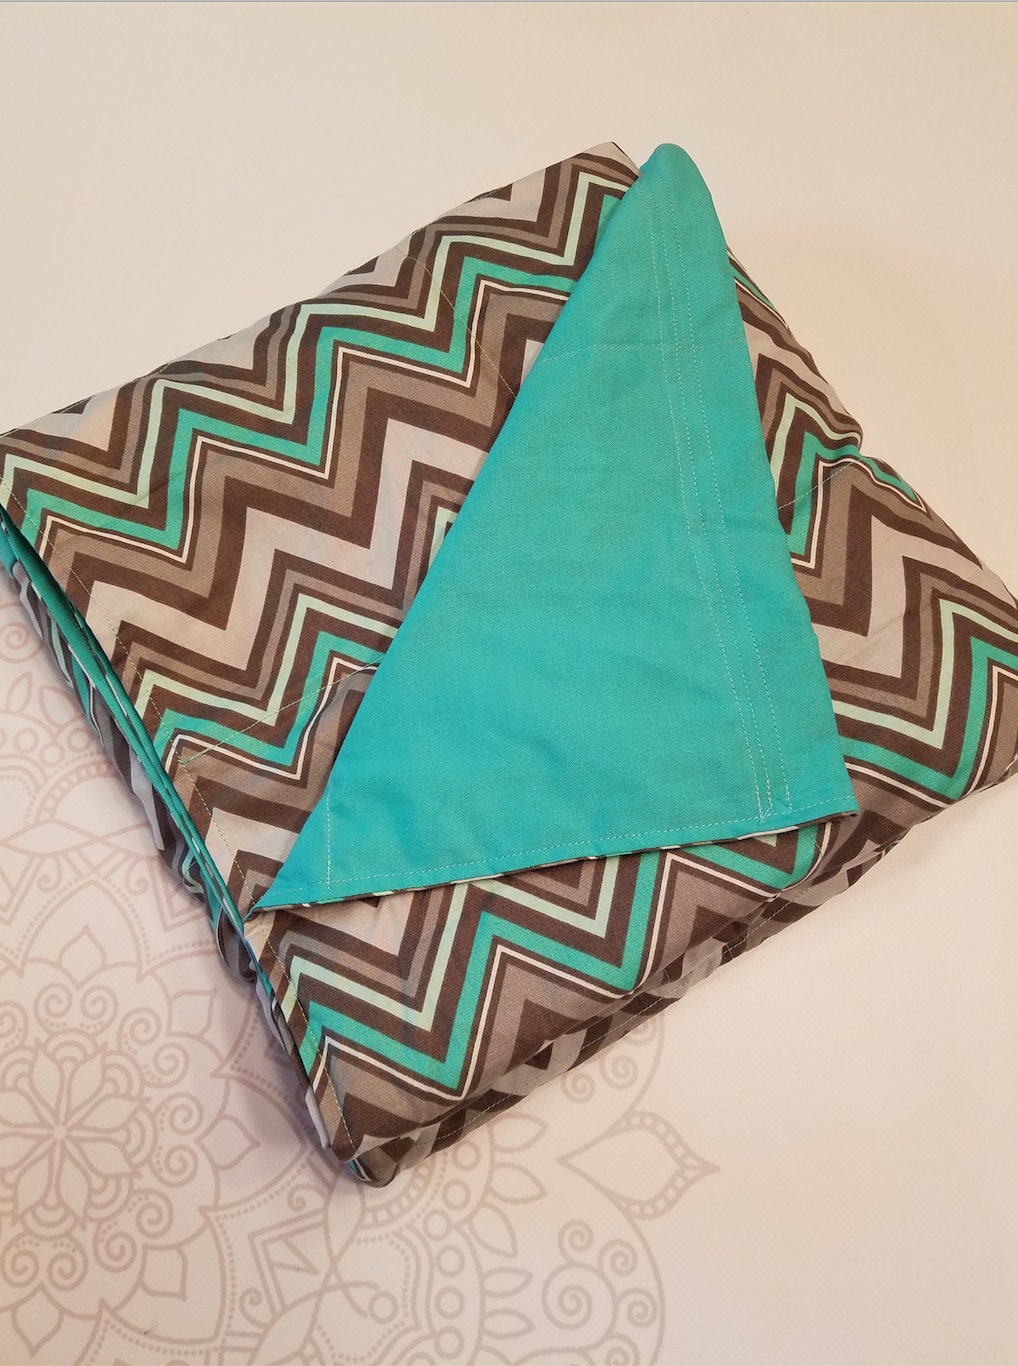 Custom Weighted Blanket, Cotton,Flannel, Up to Twin Size, 3 to 20